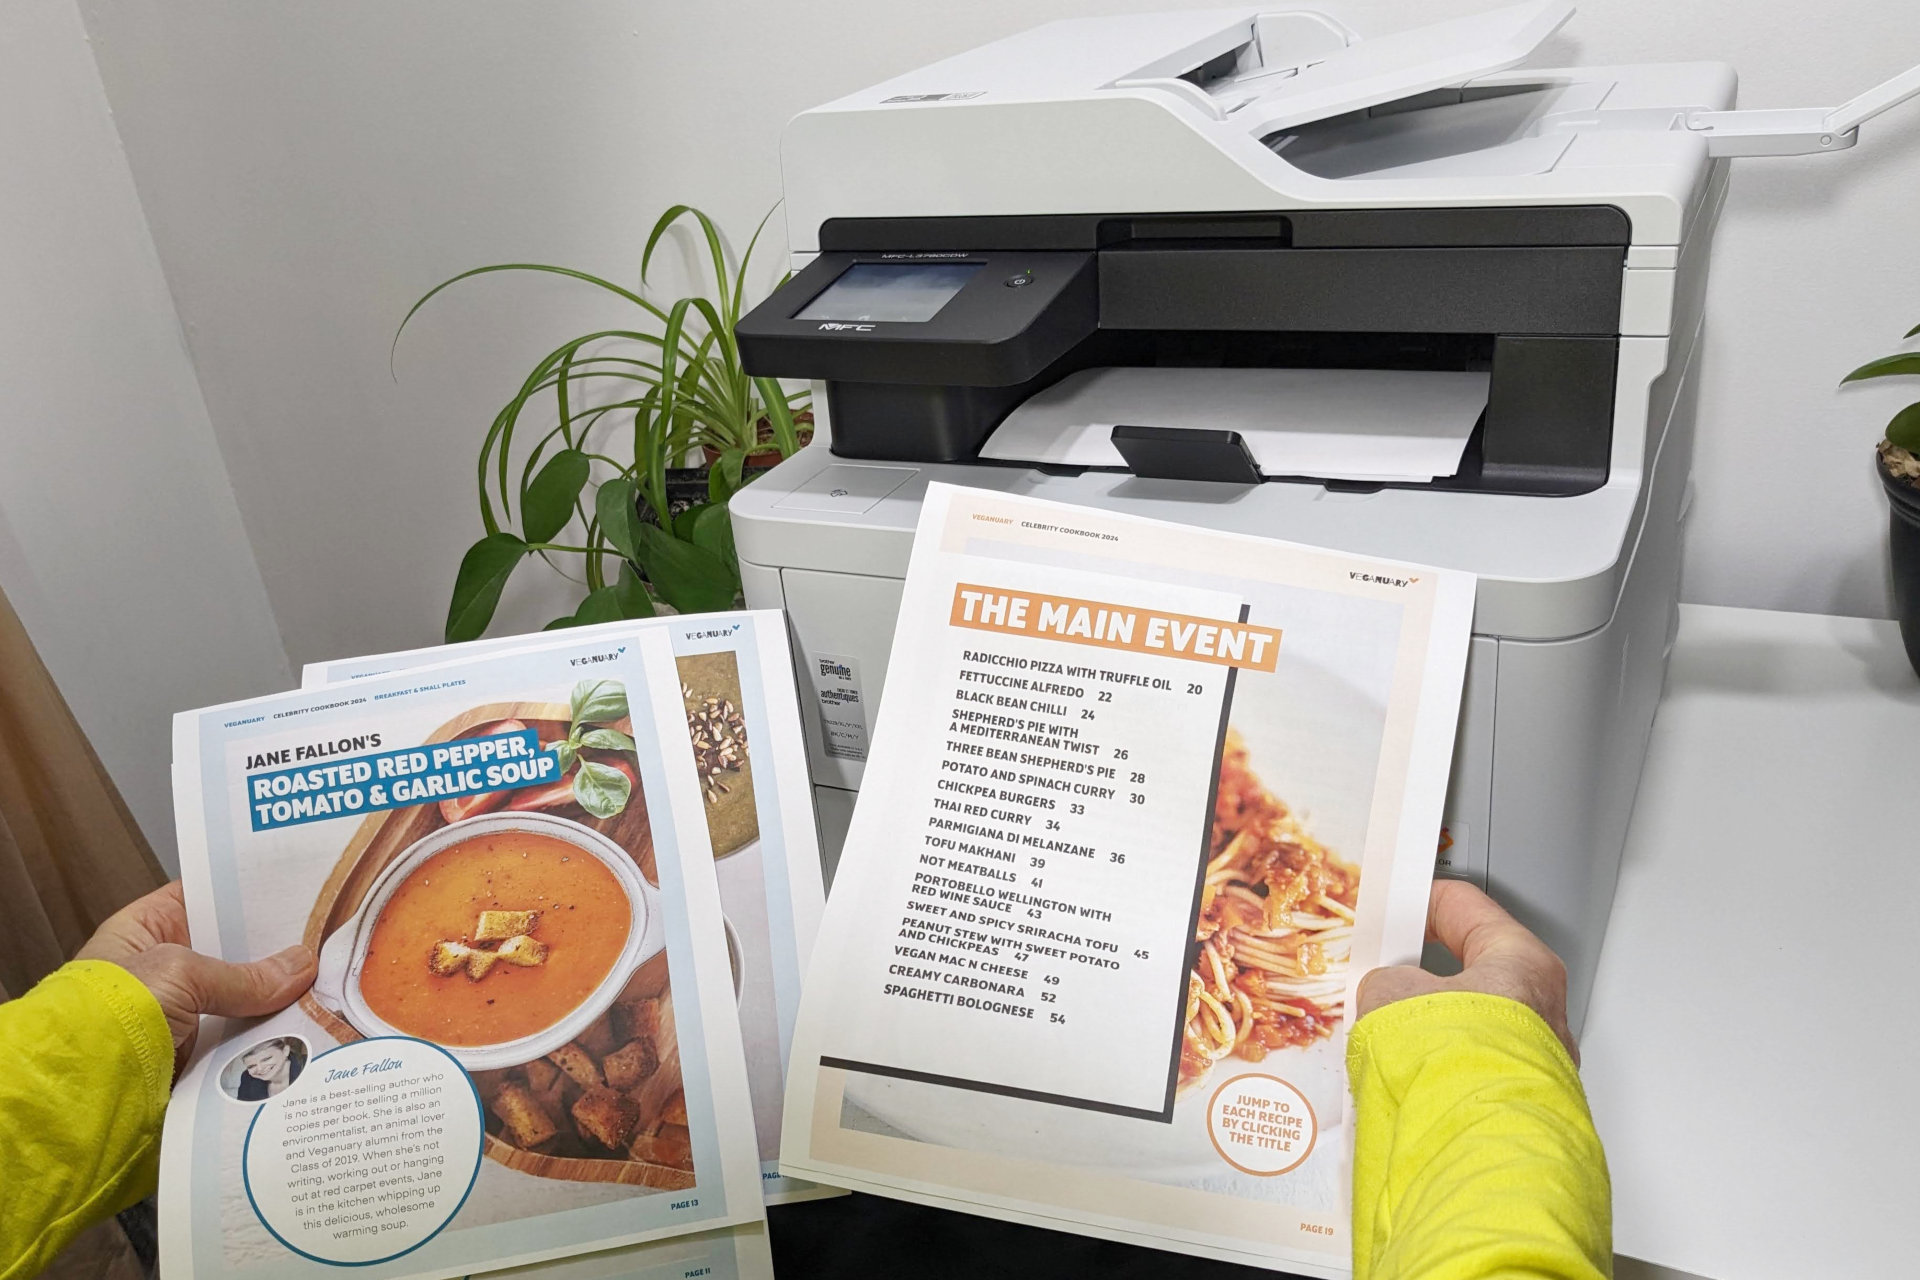 The Brother MFC-L3780 CDW is great for color documents.